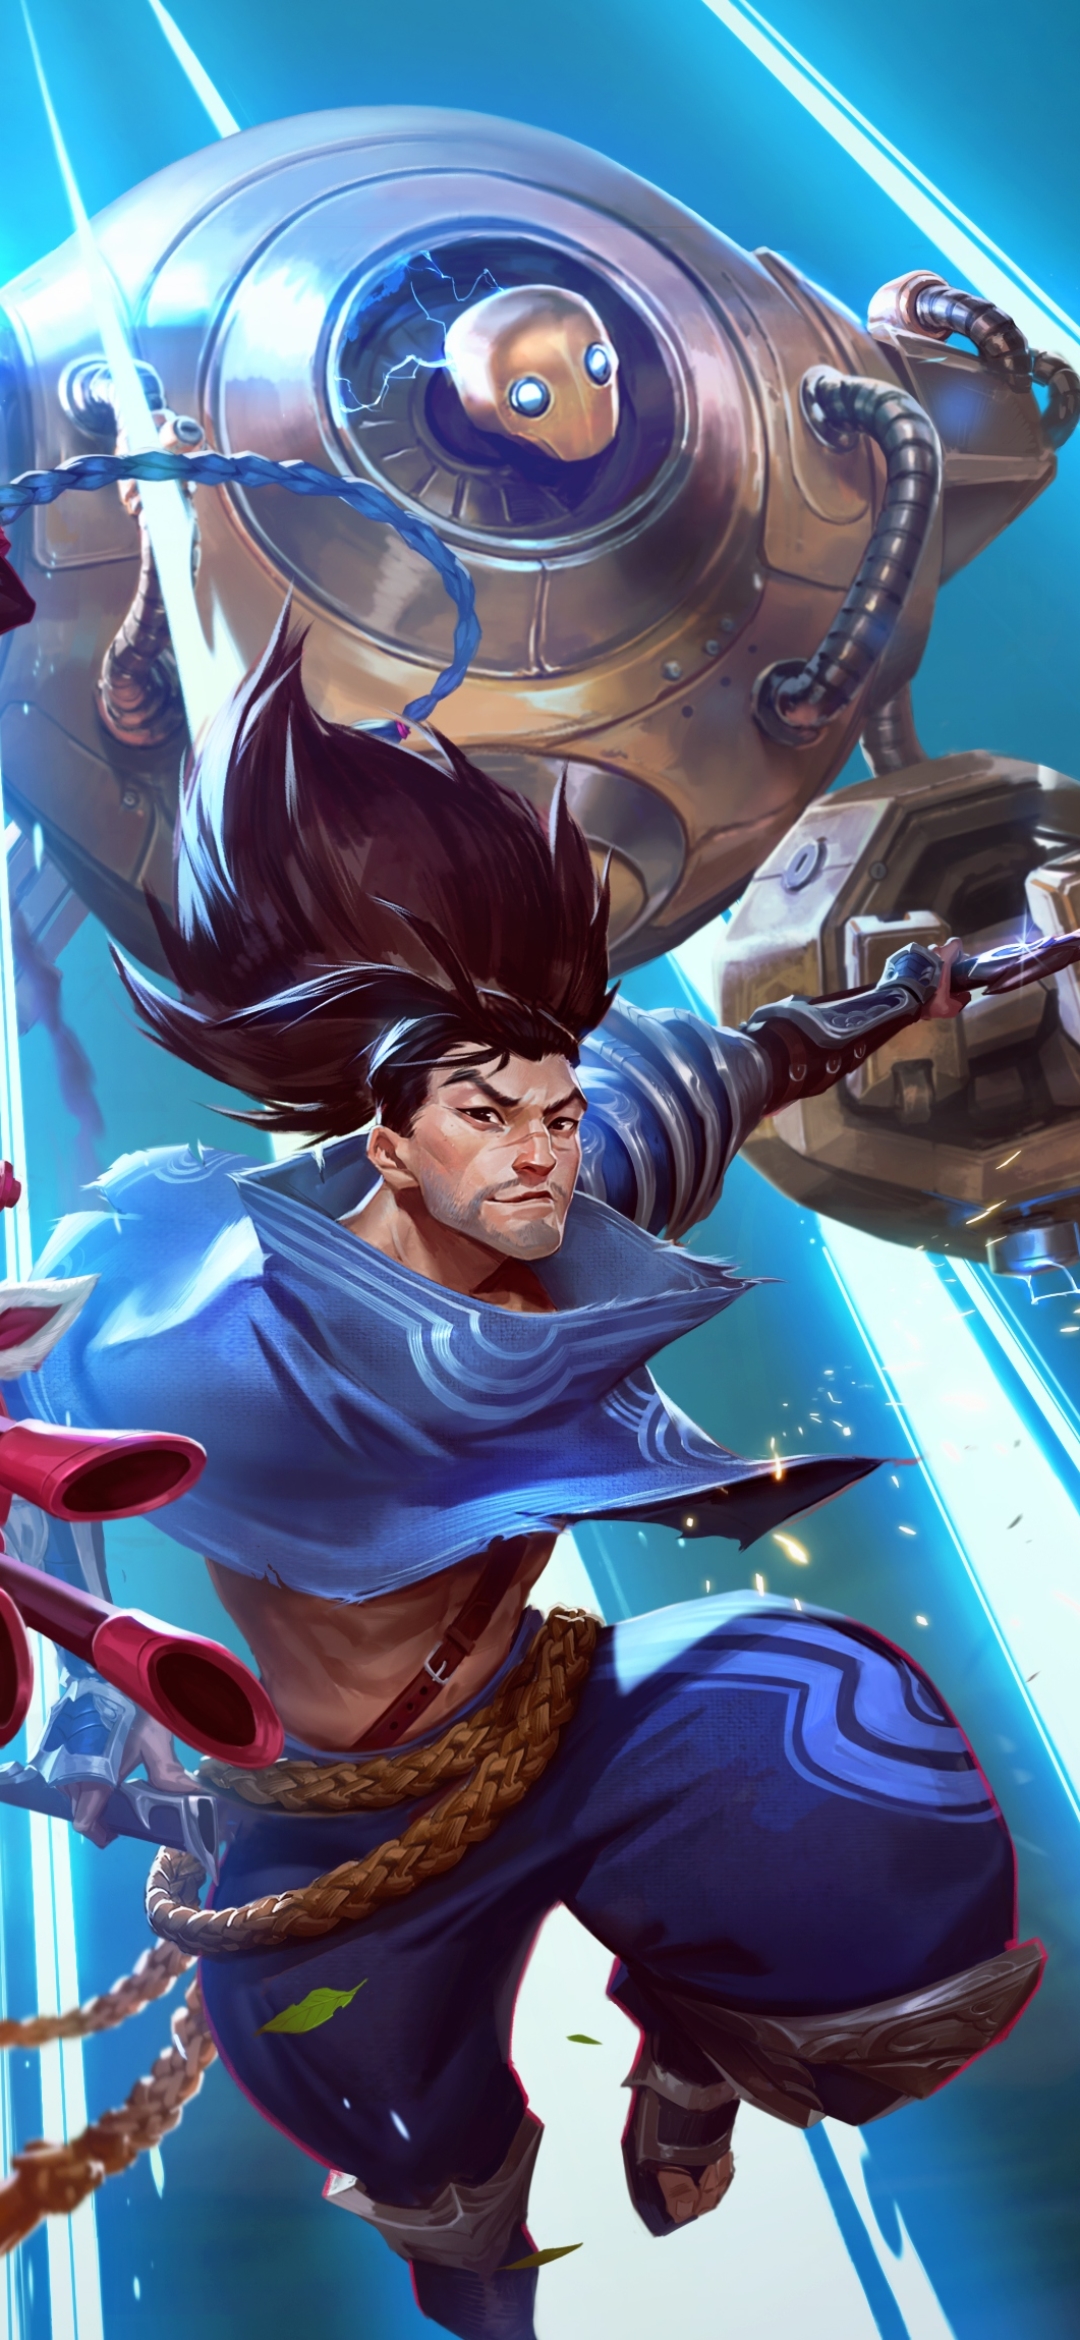 league of legends: wild rift, video game, yasuo (league of legends), league of legends